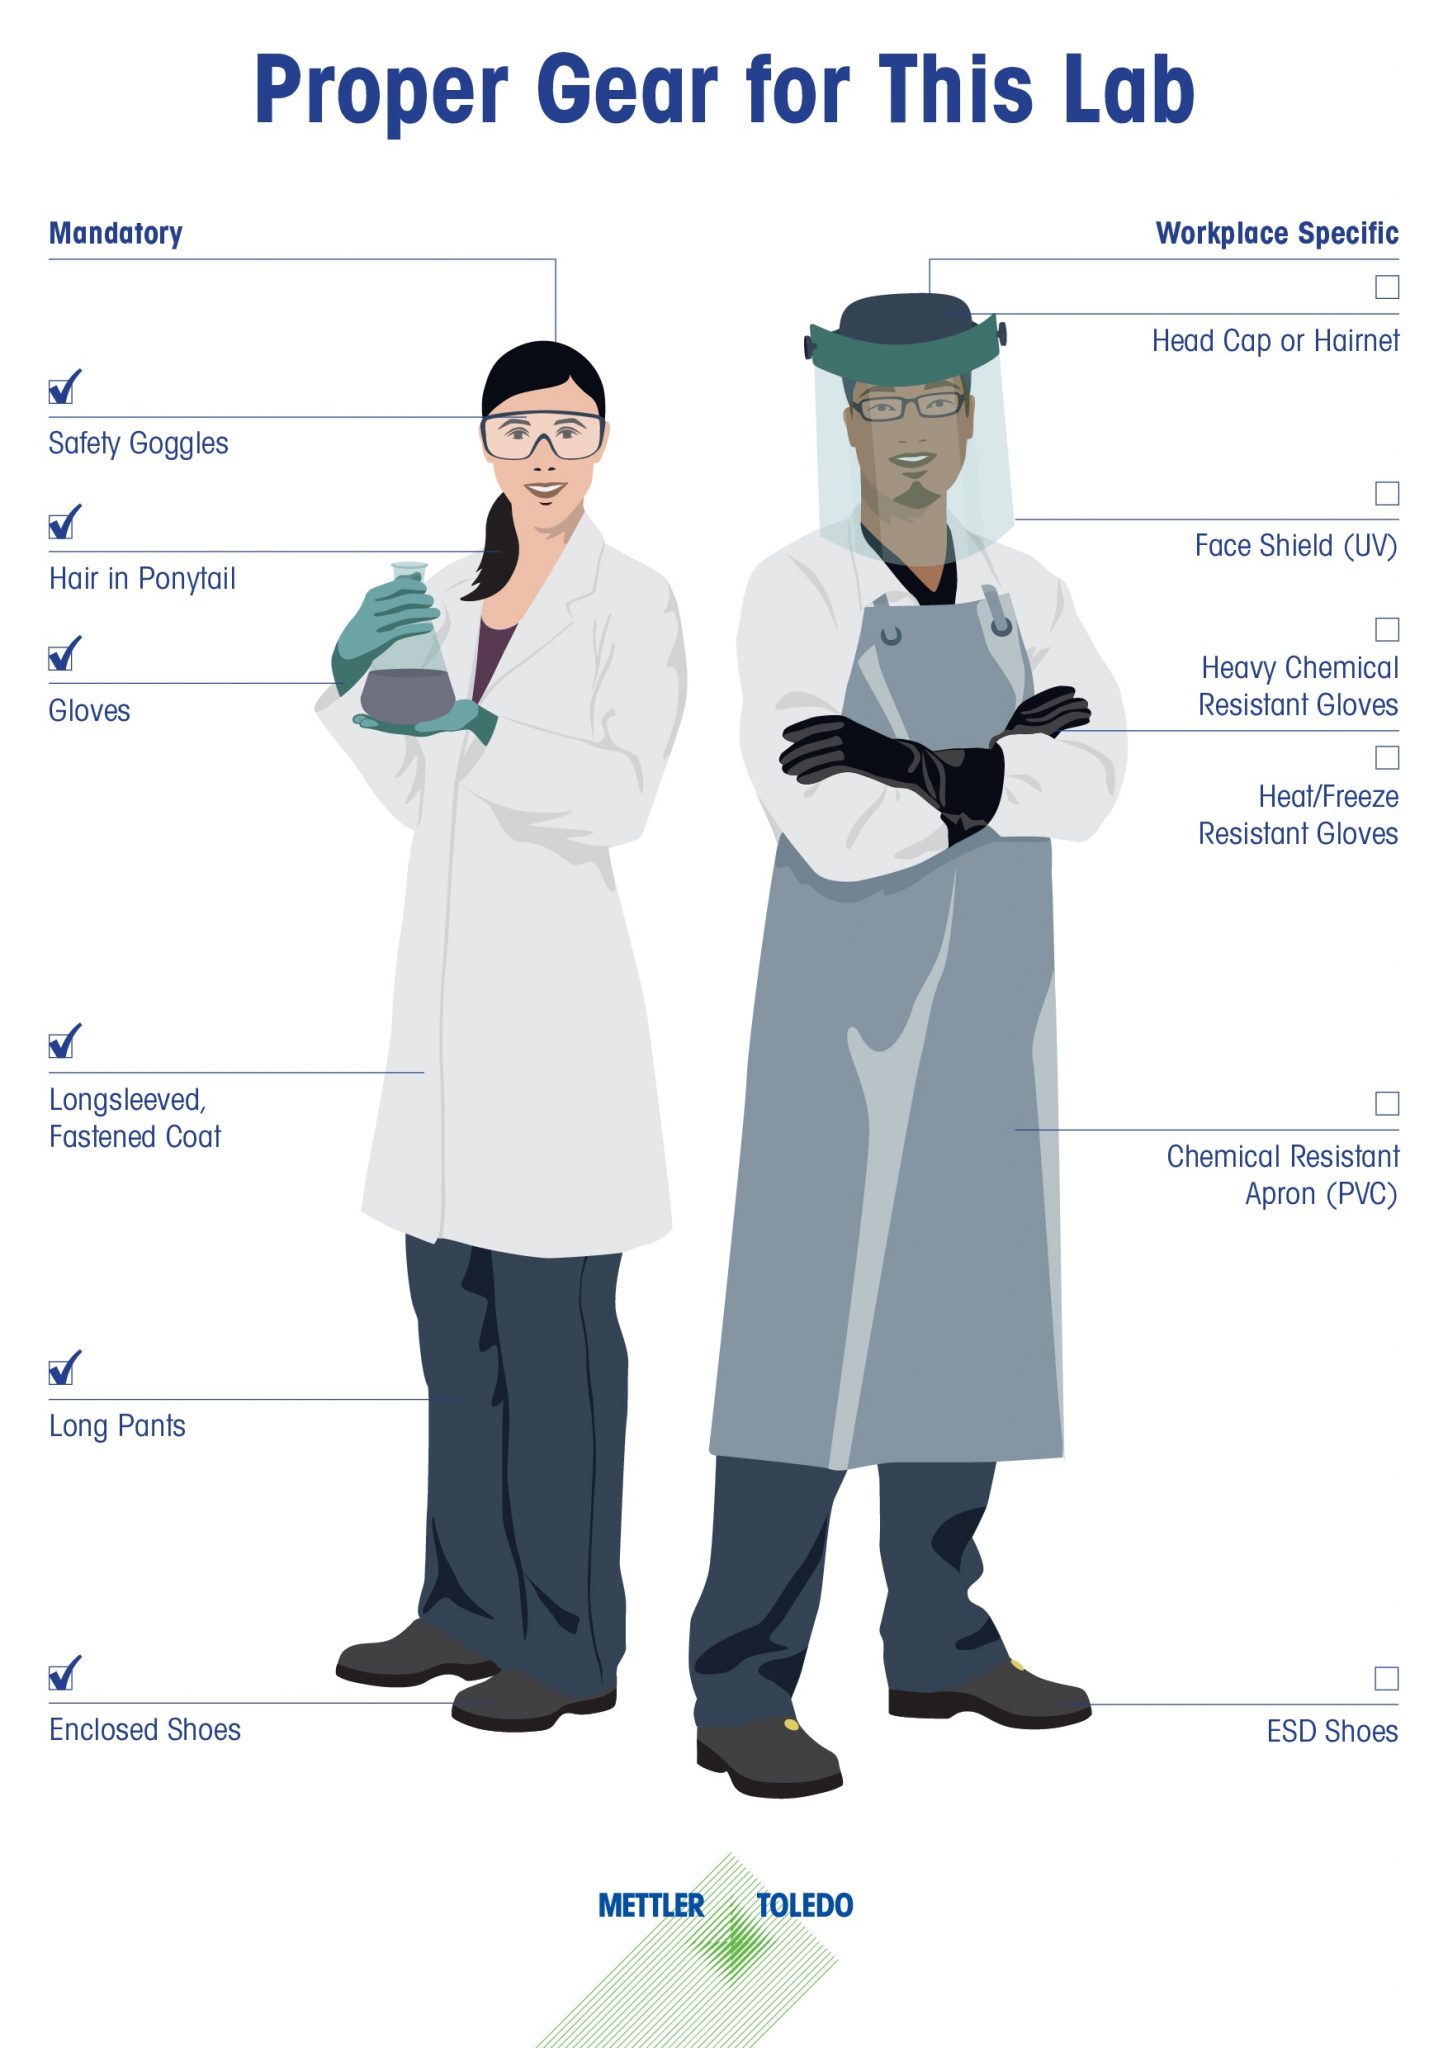 Not Every Lab Faces the Same Hazards: Customizable Poster Lets You ...